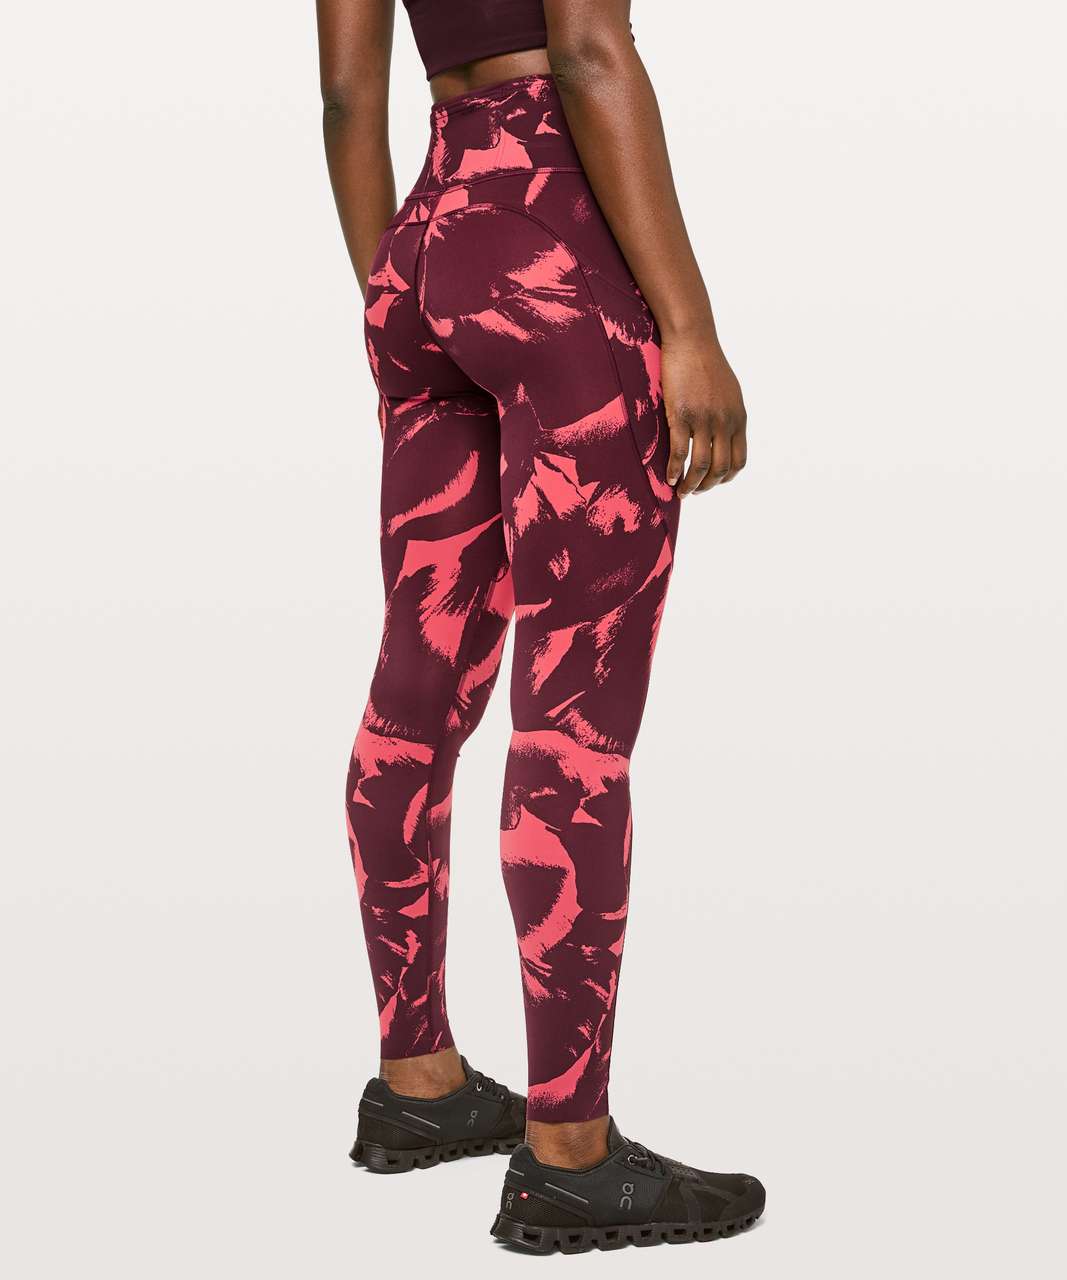 Lululemon Fast & Free Full Length Tight *Non-Reflective 28" - Flower Pop Poppy Coral Deep Ruby